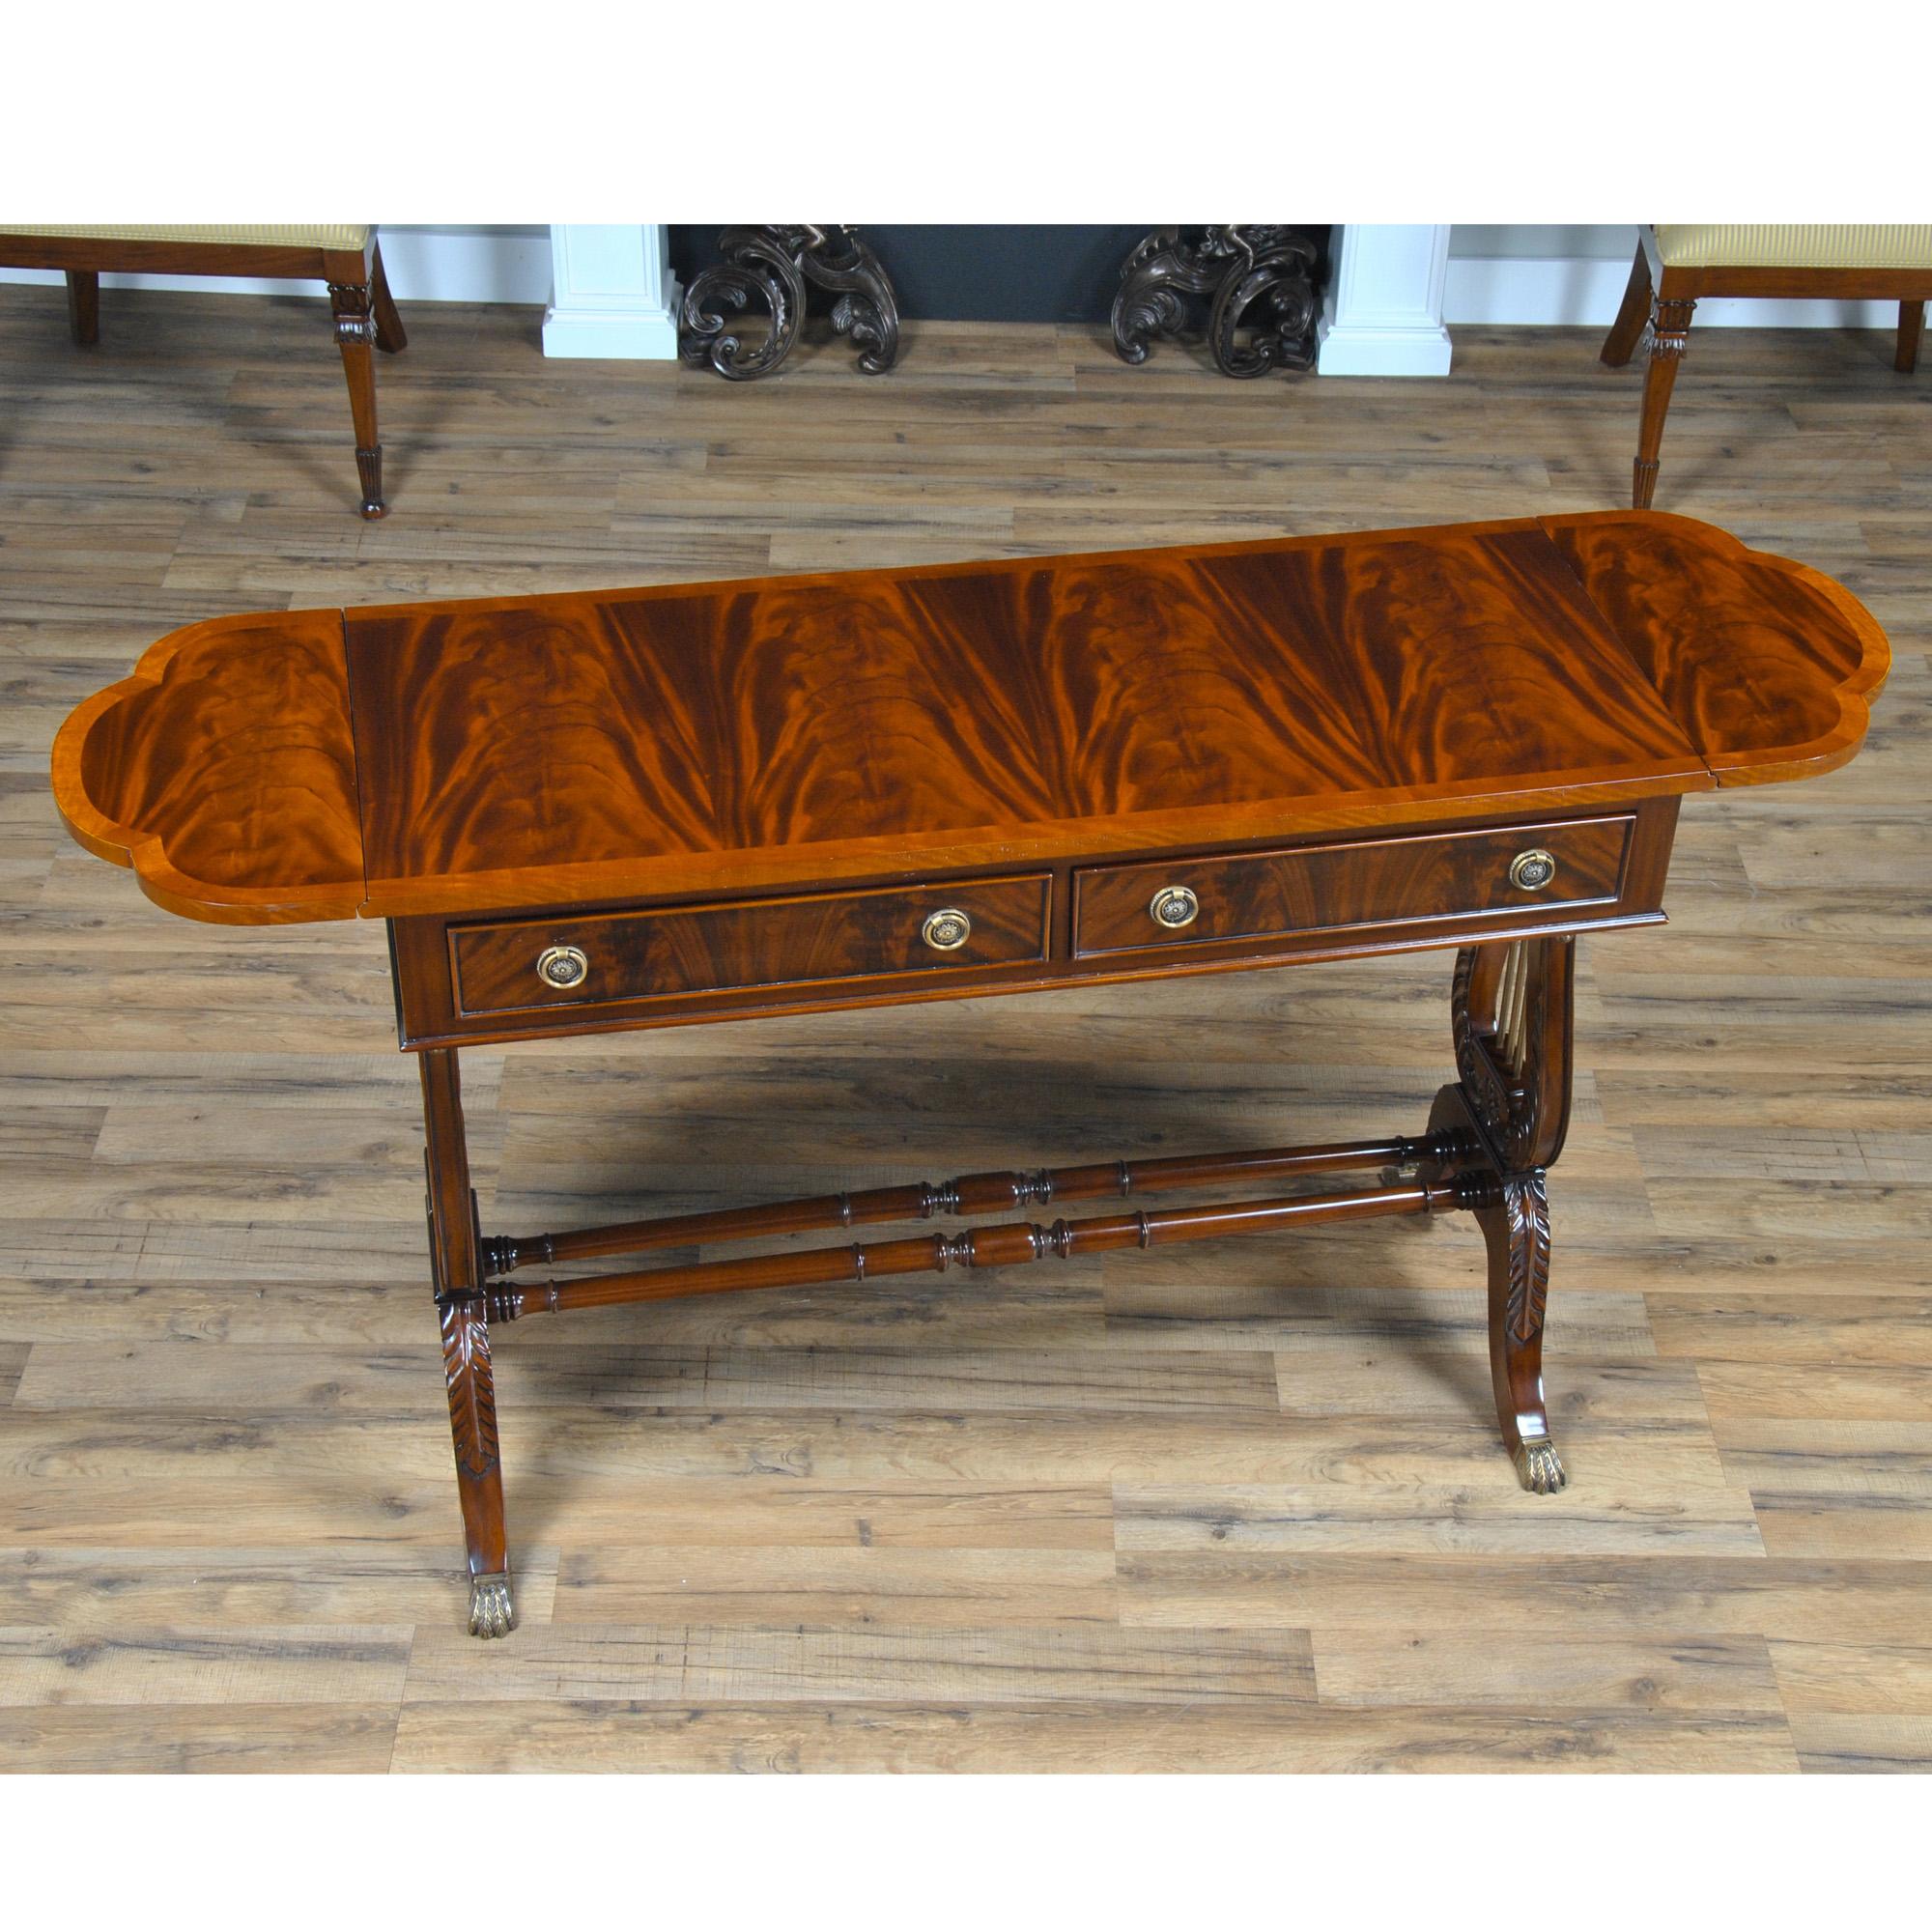 This is another item in the Niagara Furniture lyre collection, our Dropside Sofa Table has a beautifully crafted top featuring figural mahogany and satinwood, all of which is hand cut and pieced together by skilled artisans. The Dropside Sofa Table